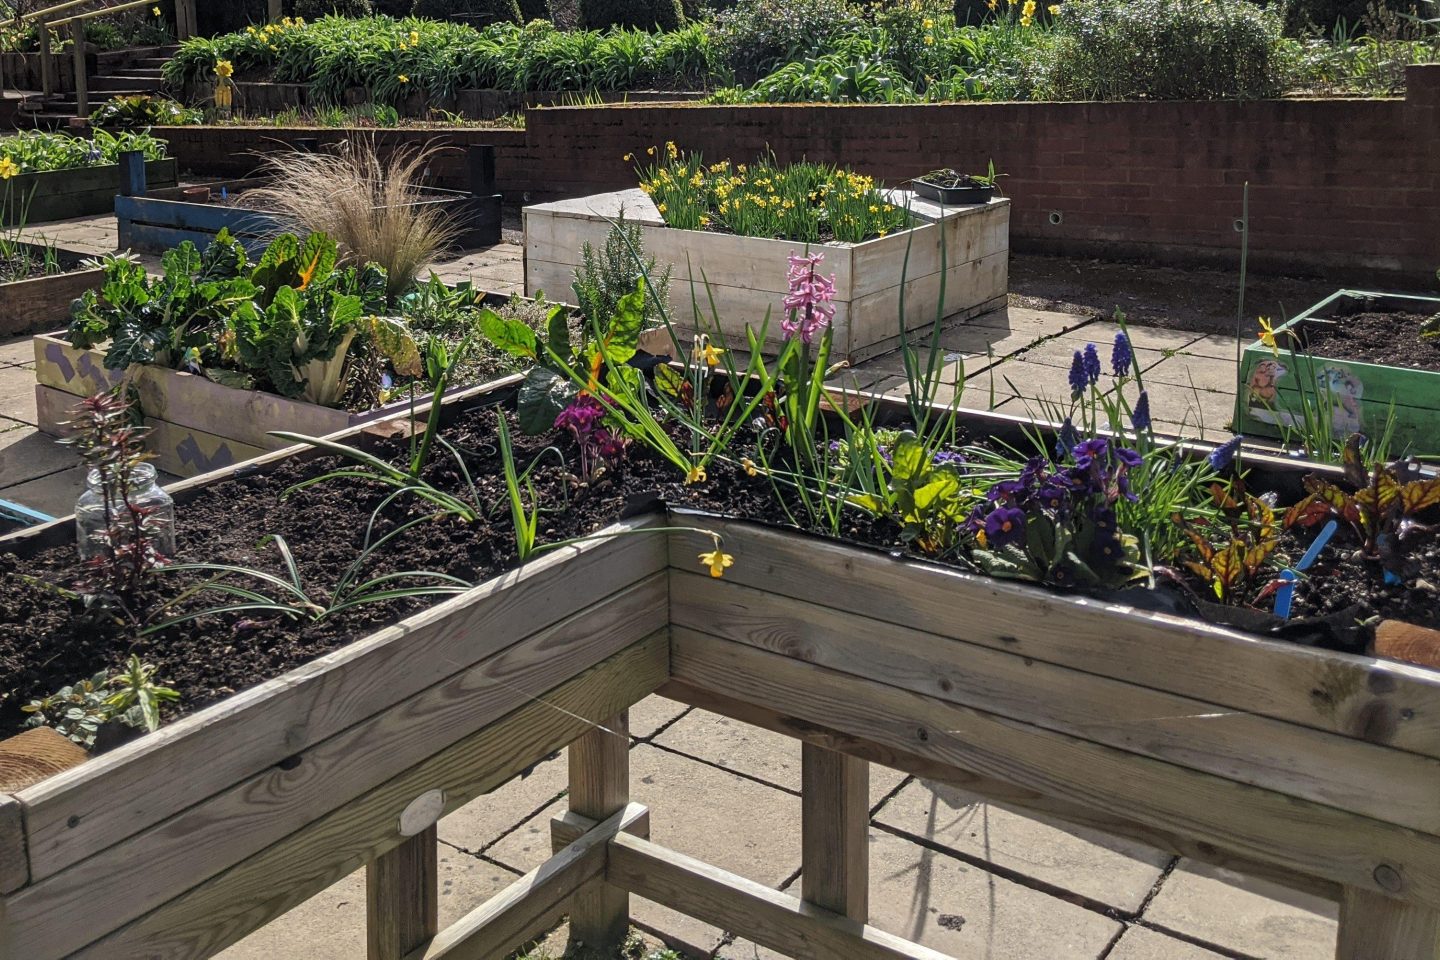 A paved area of garden with wooden raised beds full of plants